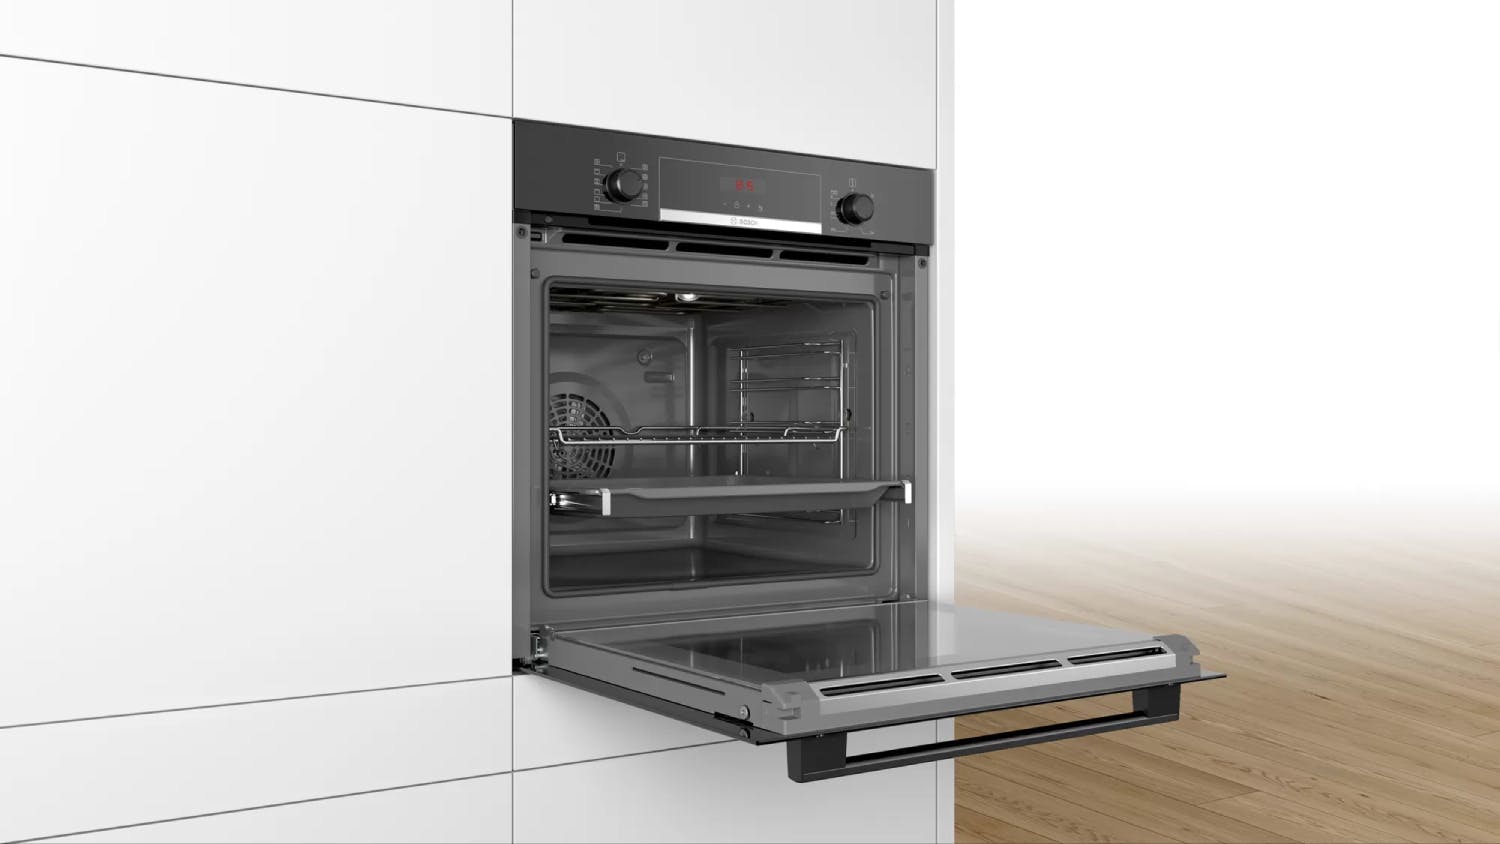 Bosch 60cm 7 Function Built-In Oven - Black (Series 4/HBA574EB0A)